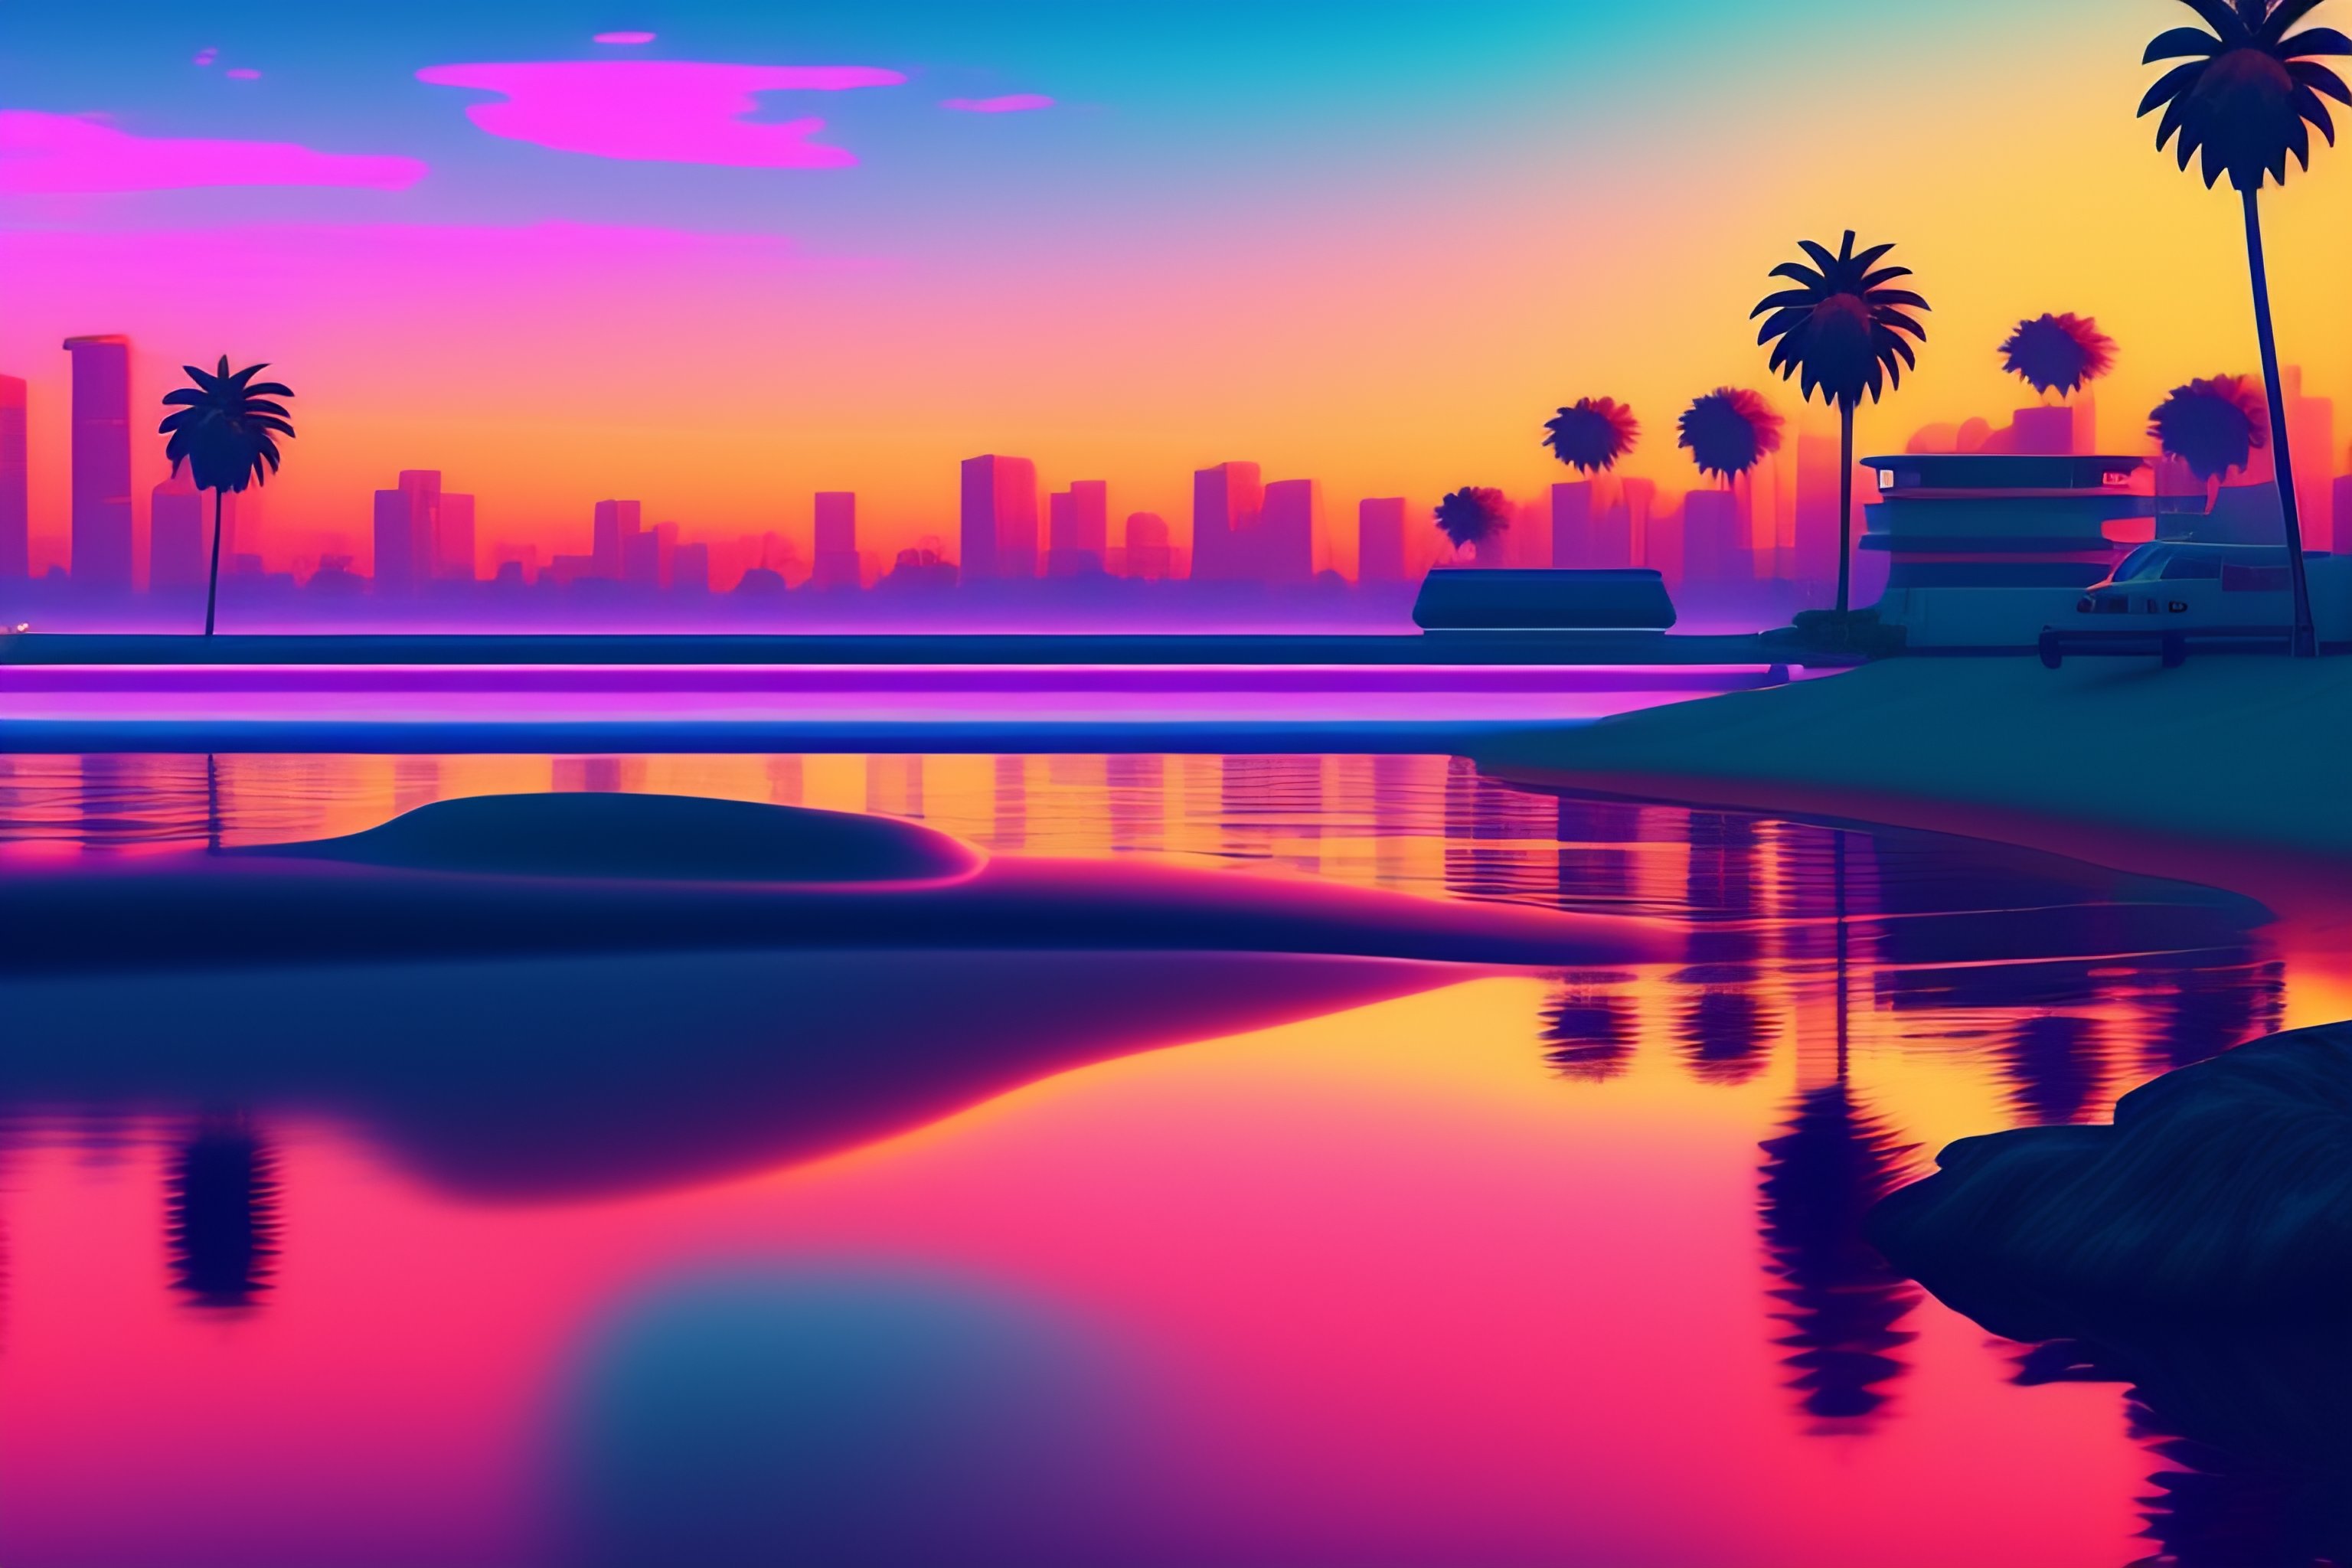 Lexica - Poster for gta 6 vice city remake, 8k,